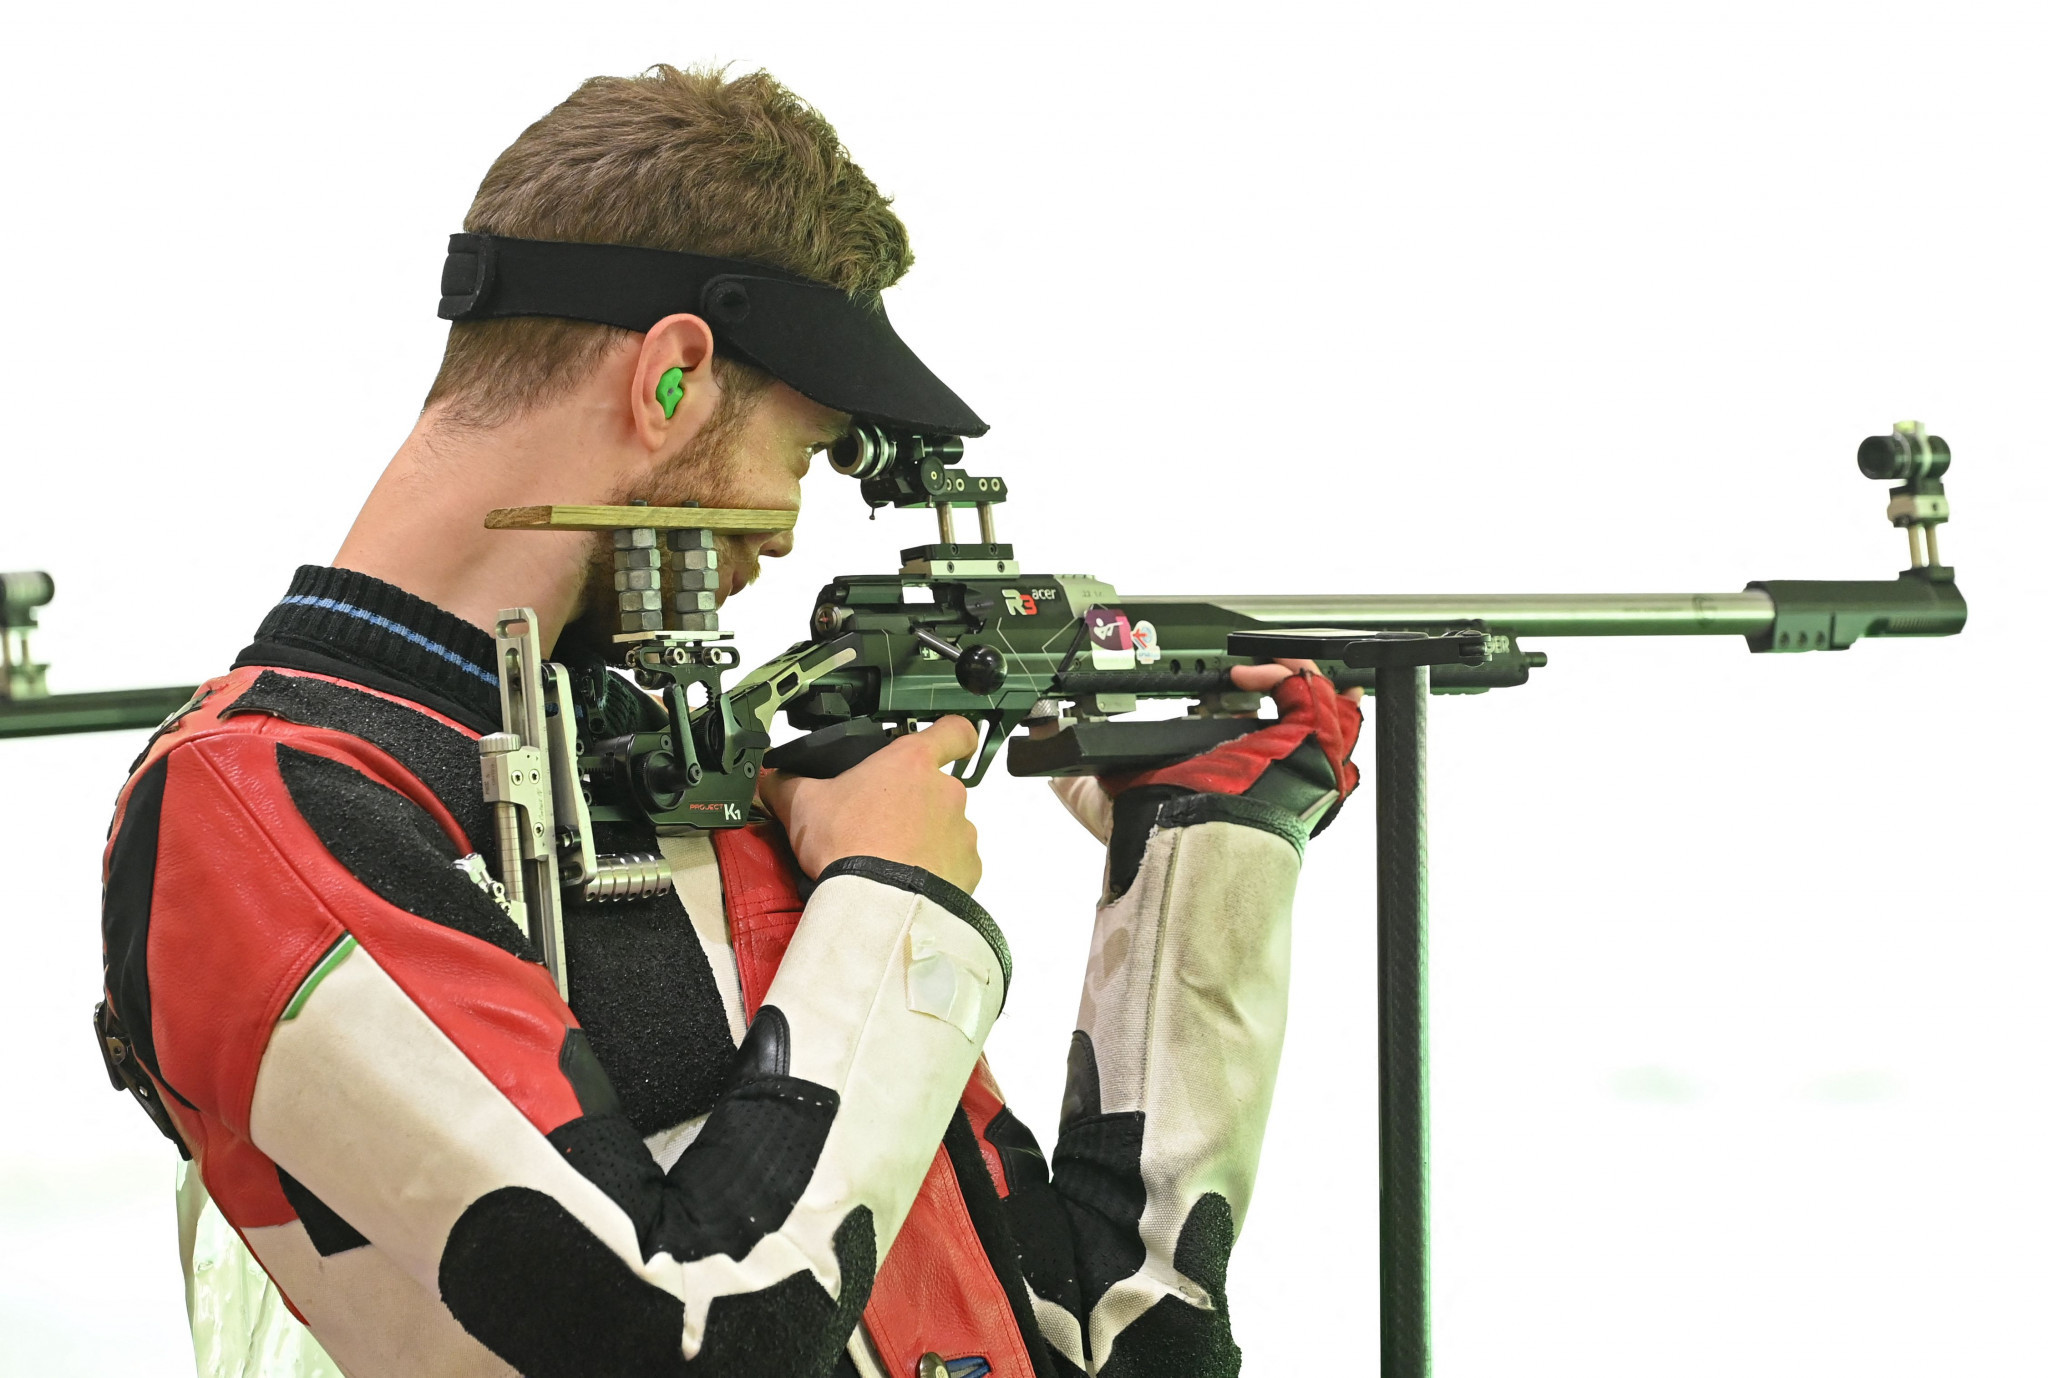 Jon Hermann-Hegg helped fire Germany to gold in the men's 50m rifle three positions team tournament ©Getty Images